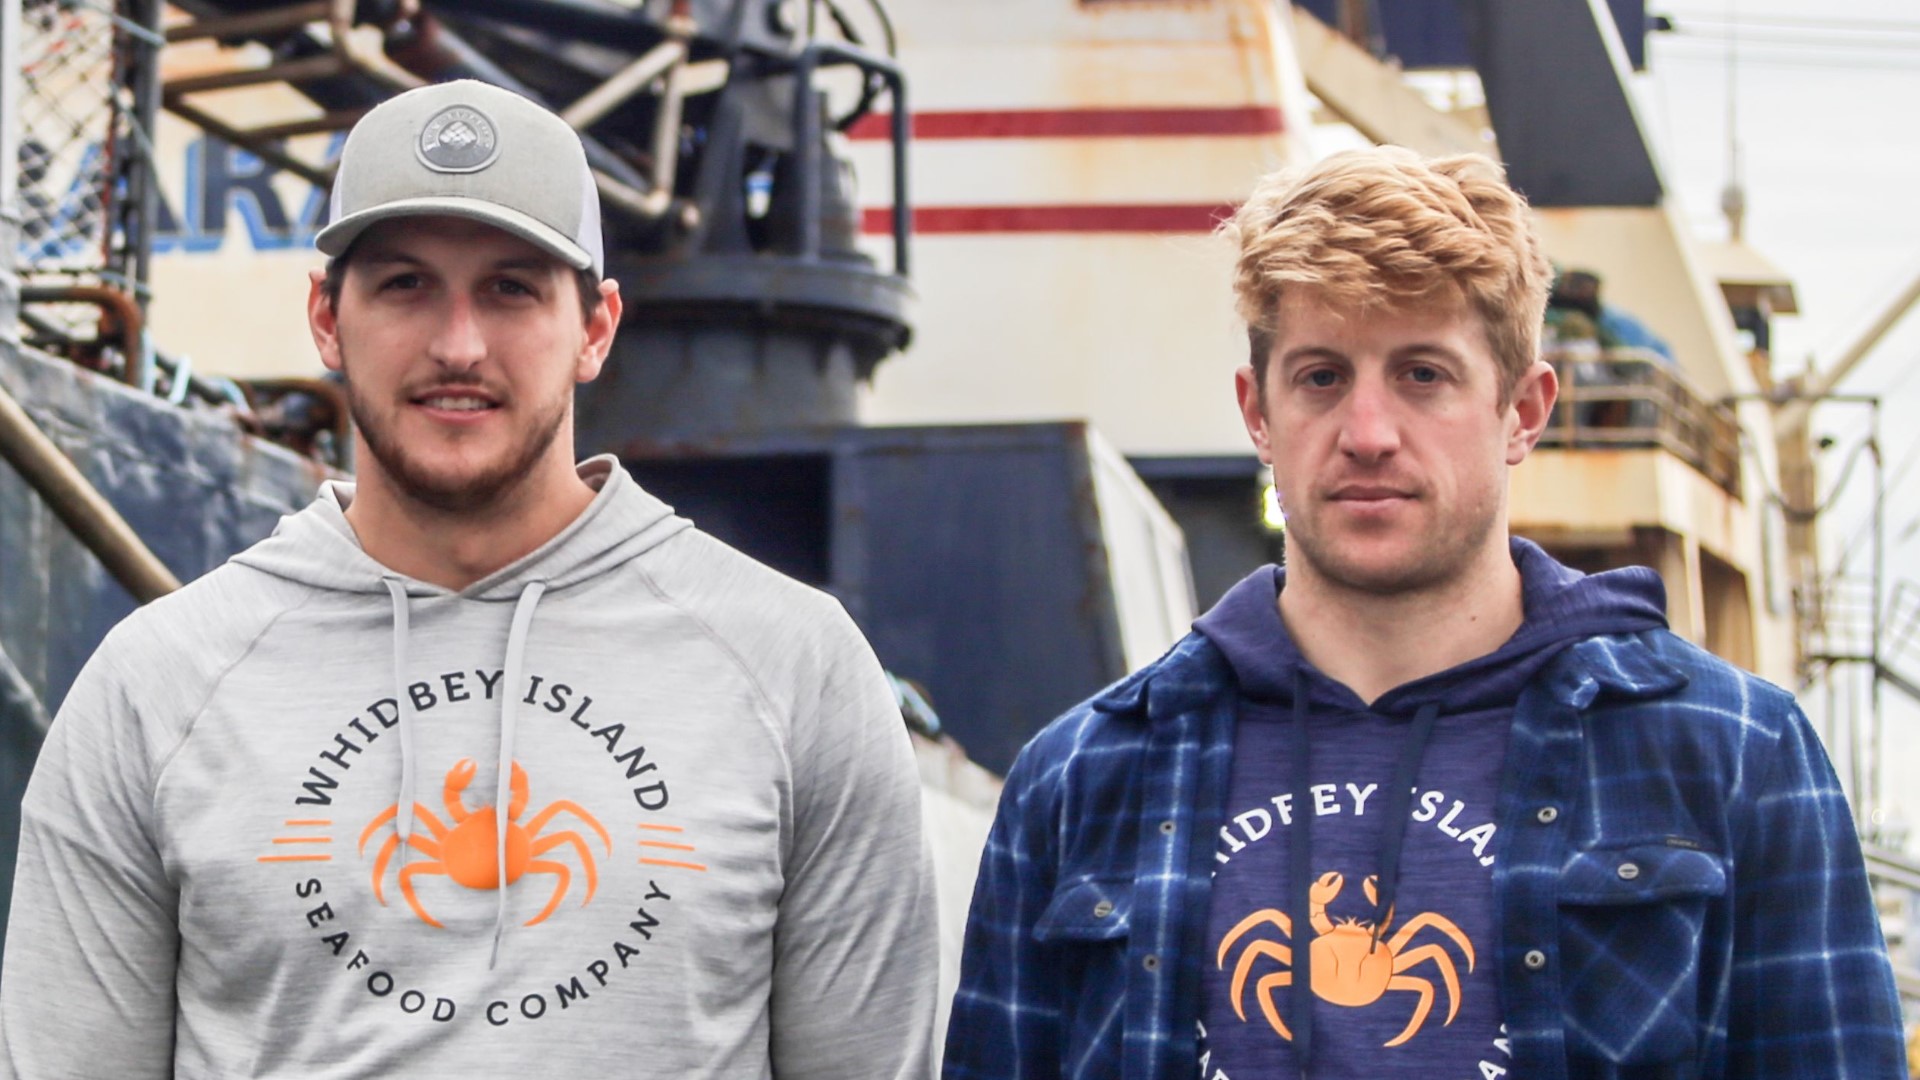 Whidbey Island Seafood Company is the brainchild of brothers Andrew and Adam Hosmer. They sell seafood that's "dock to doorstep". #k5evening